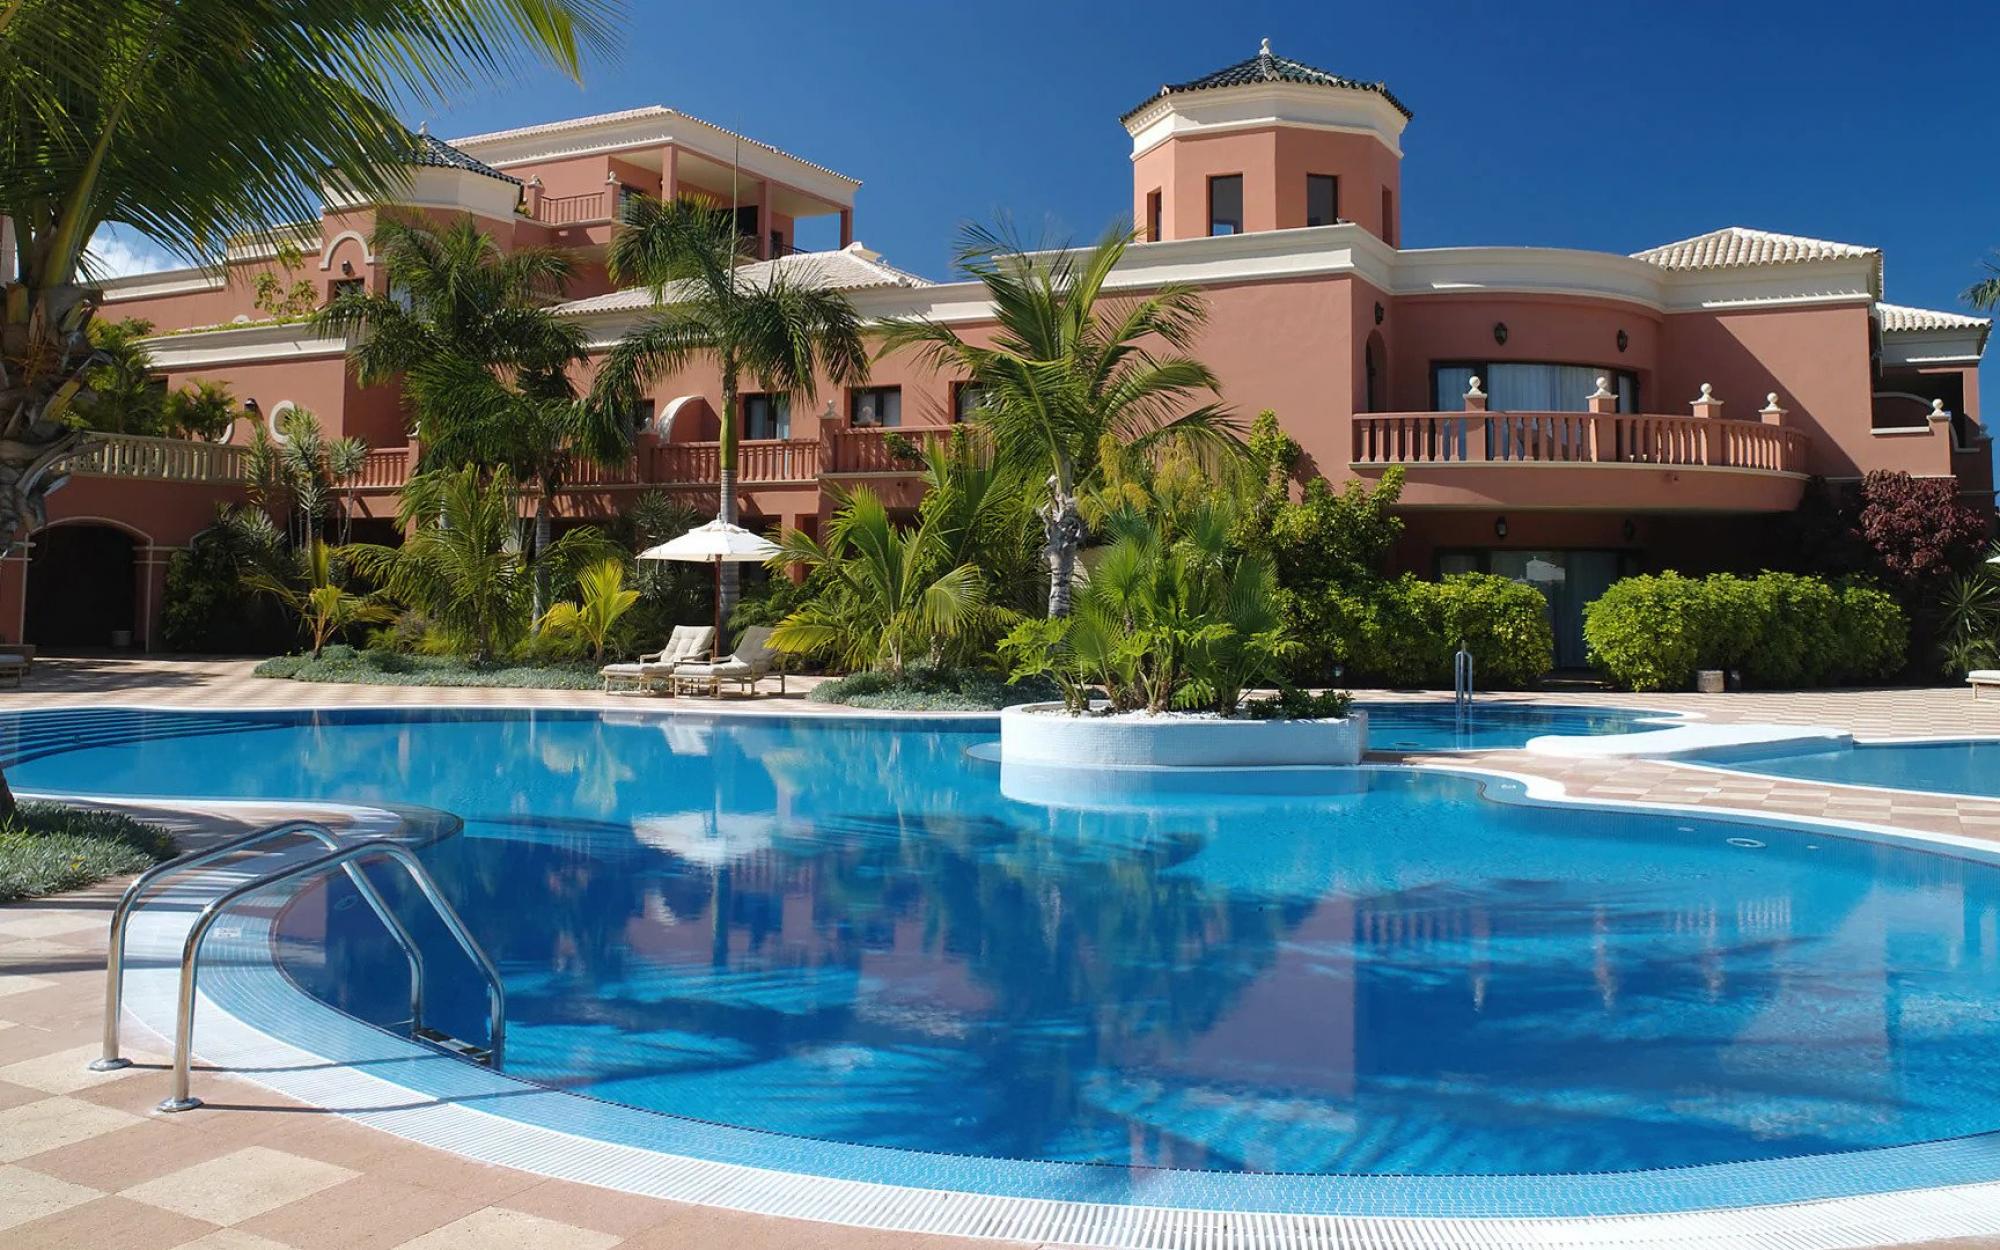 The Hotel Las Madrigueras's picturesque main pool in dazzling Tenerife.